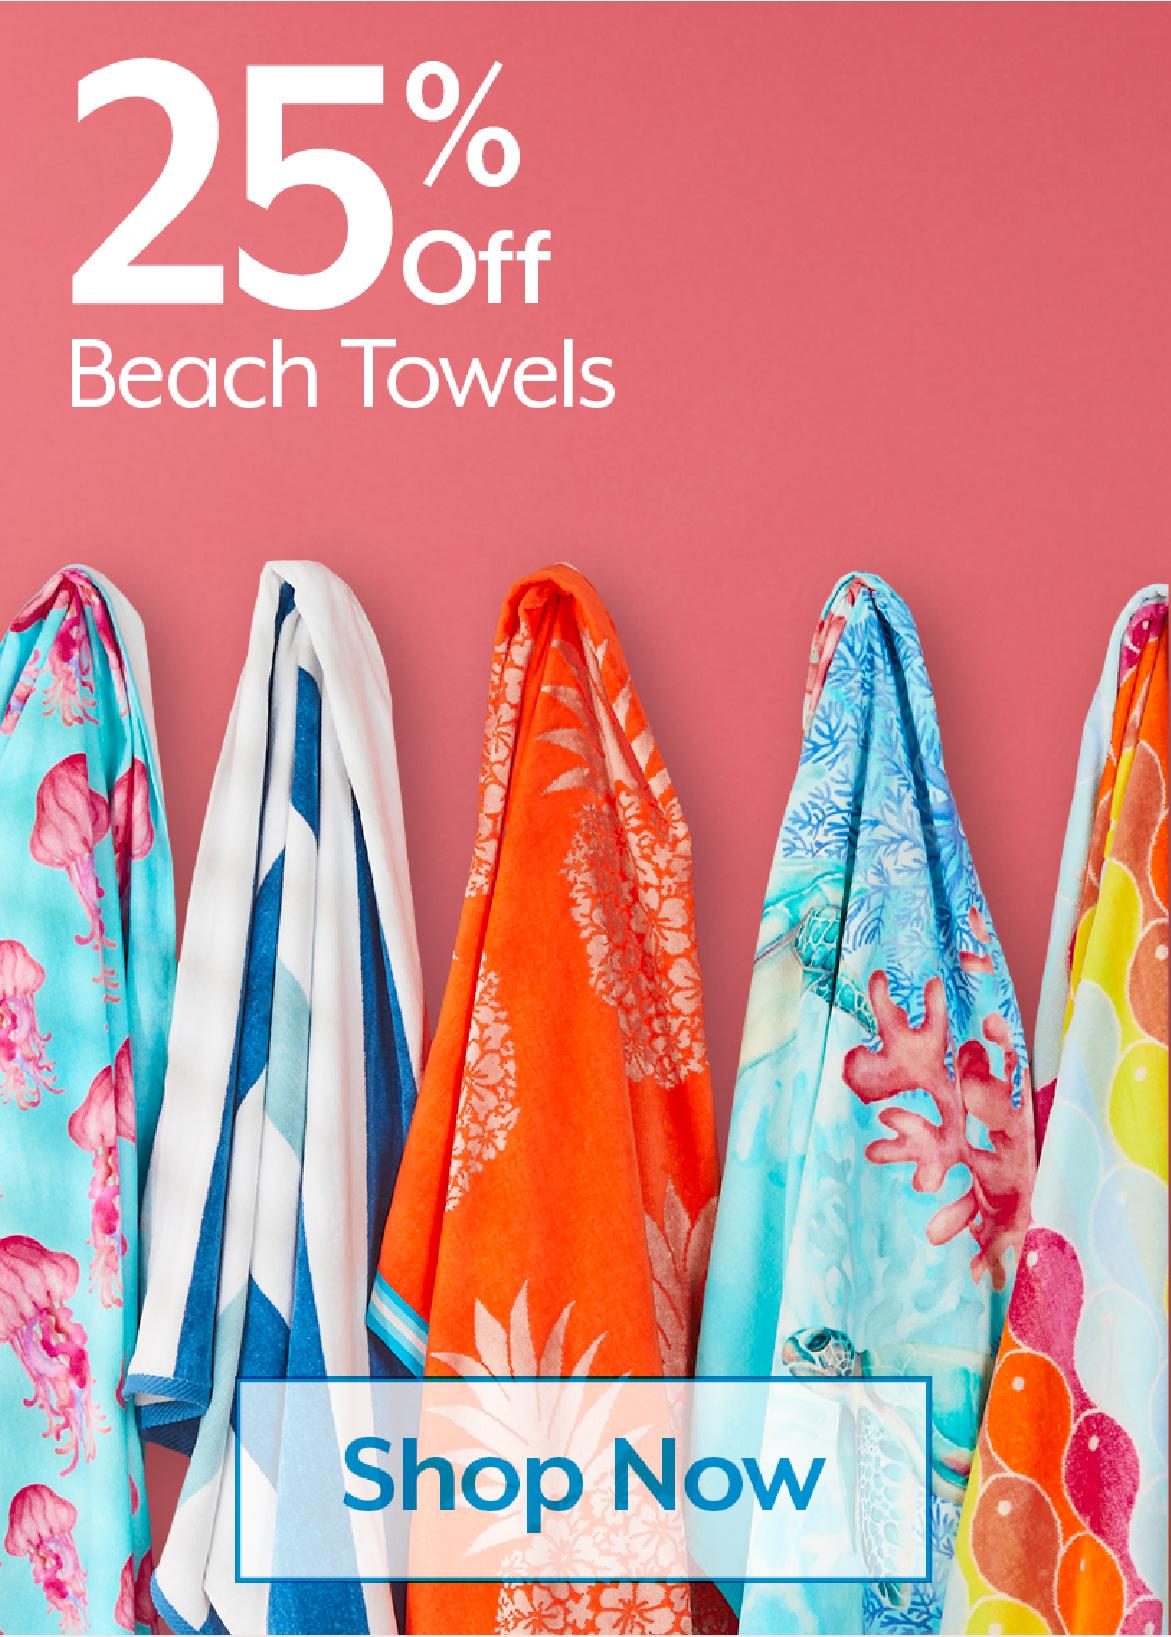 Starting at $14 Beach towels